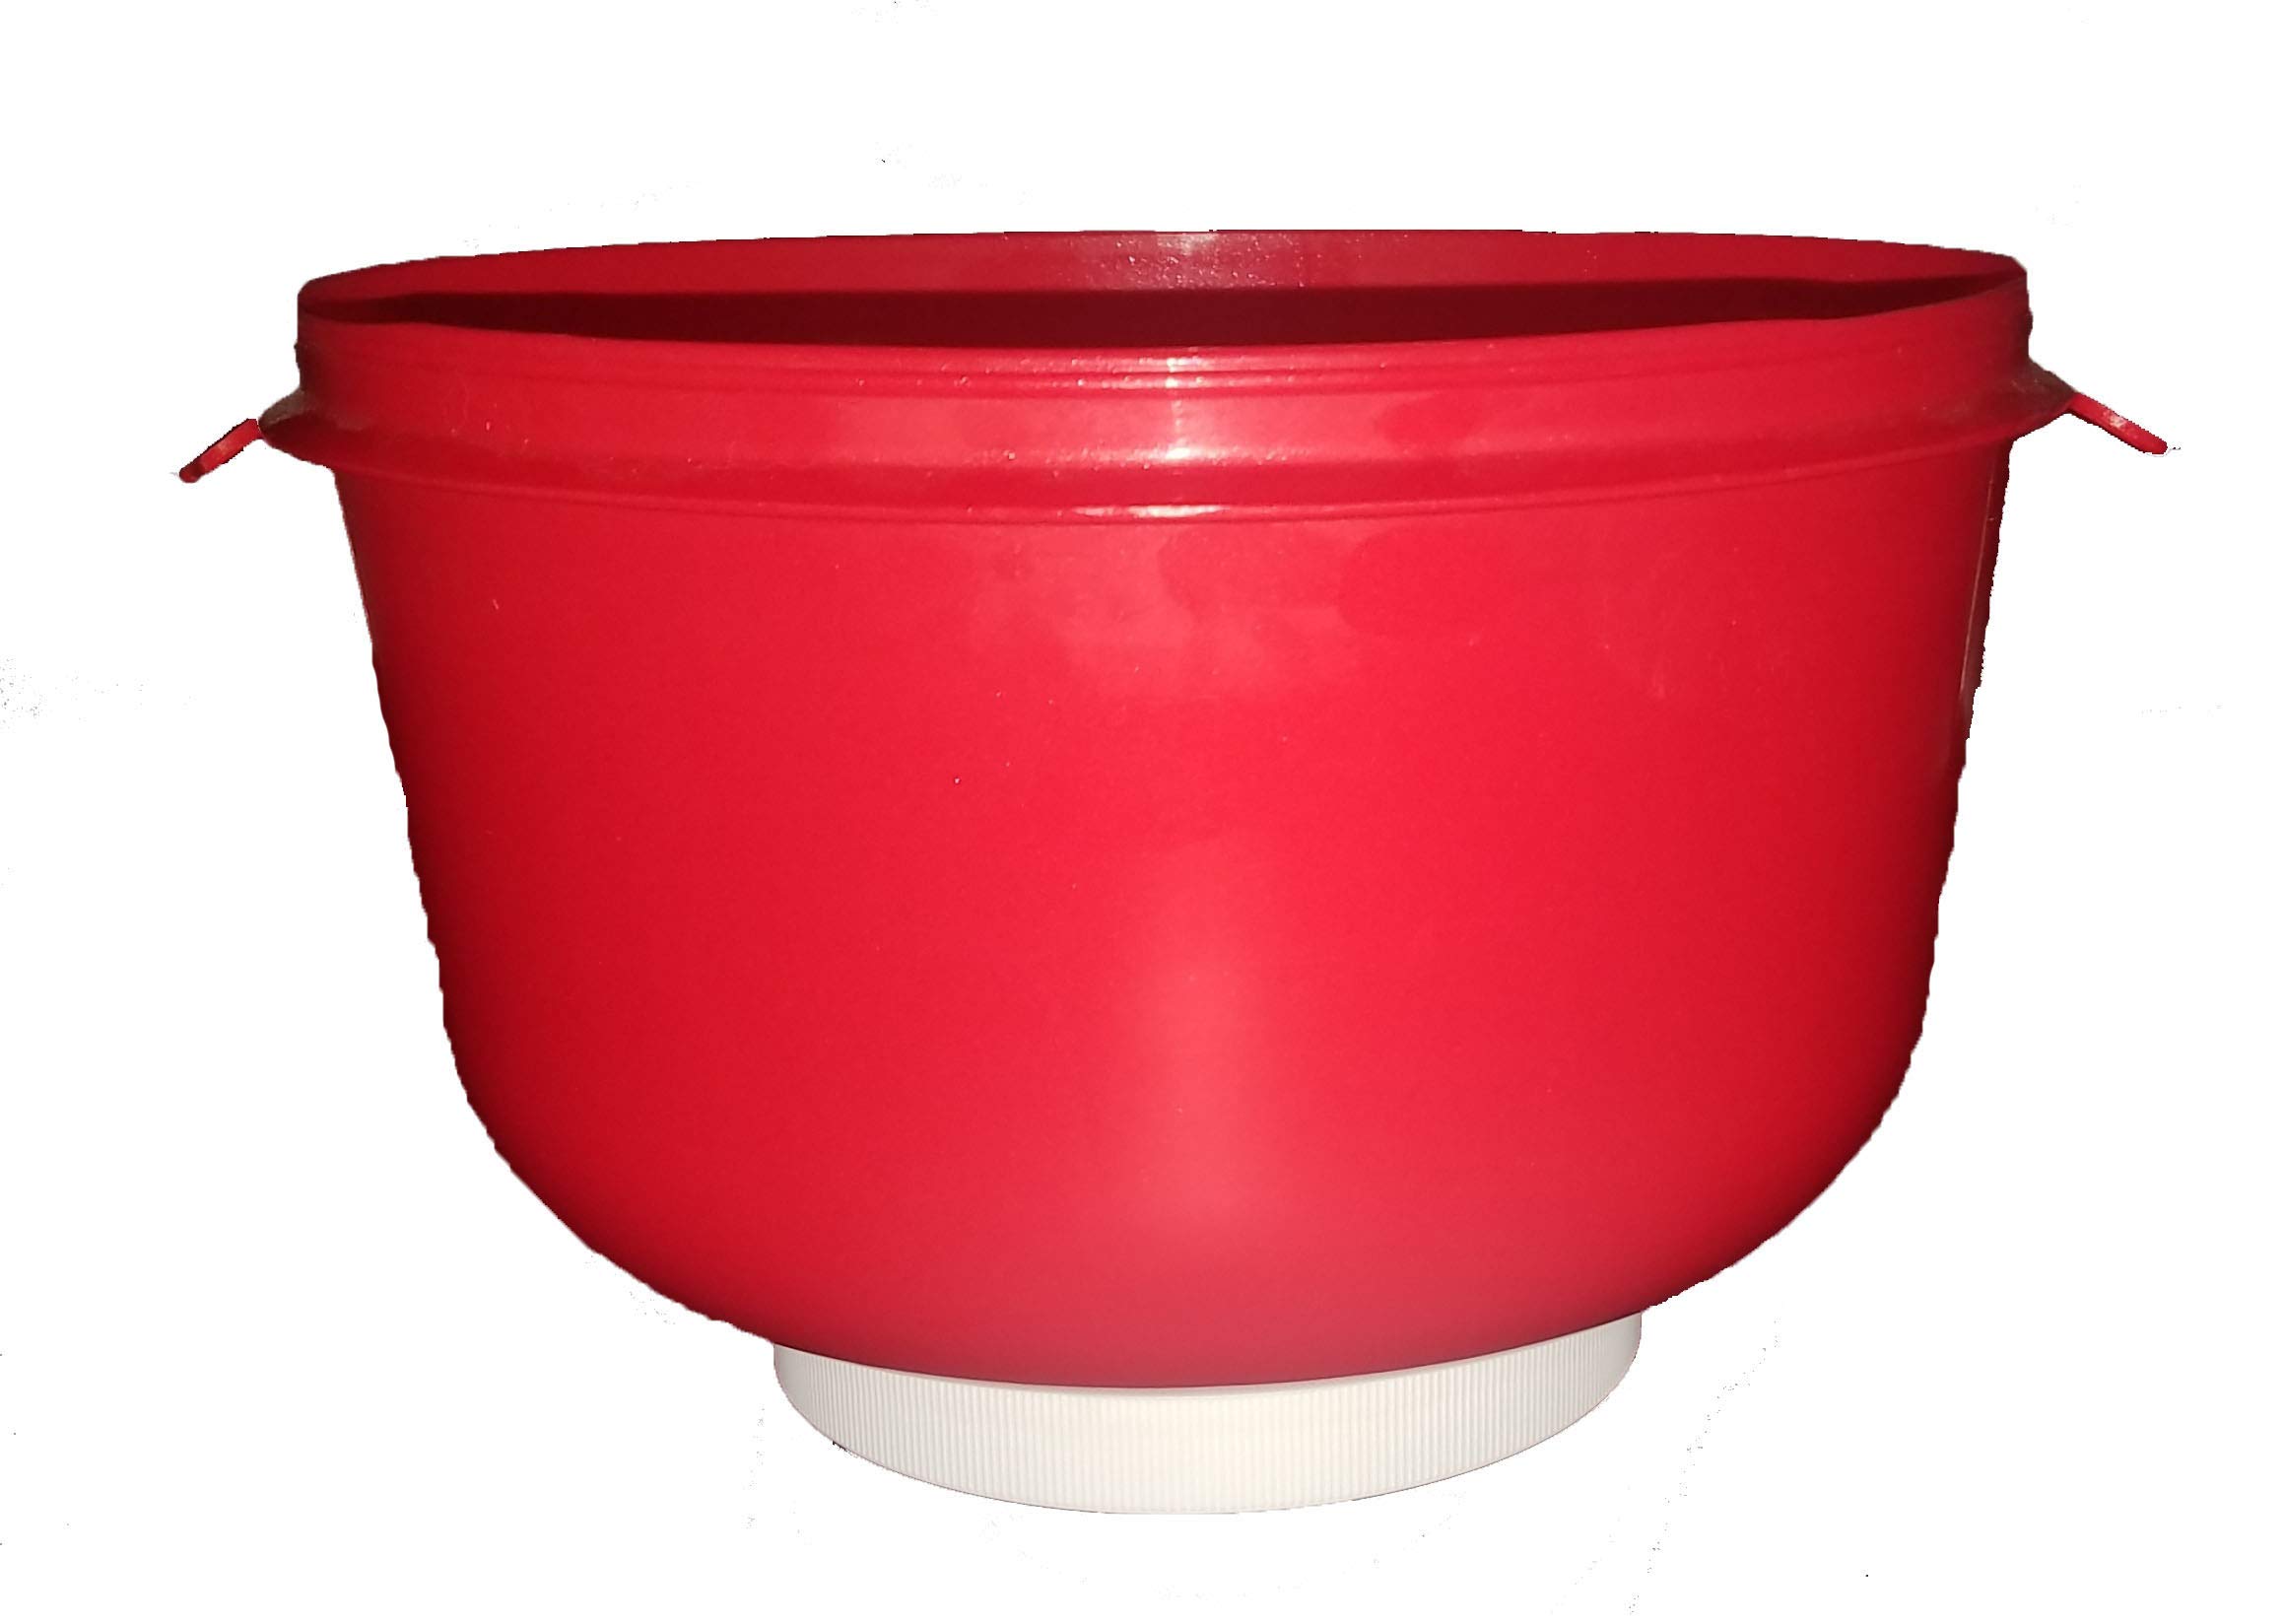 APSI Store Kernel Katcher Popcorn Bowl Set - Popcorn Bowl Strainer Sifter Shaker Kernel Catcher and Separator, Large and Reusable With Lid, Dishwasher Safe, Recycled Plastic with Handle (Red)